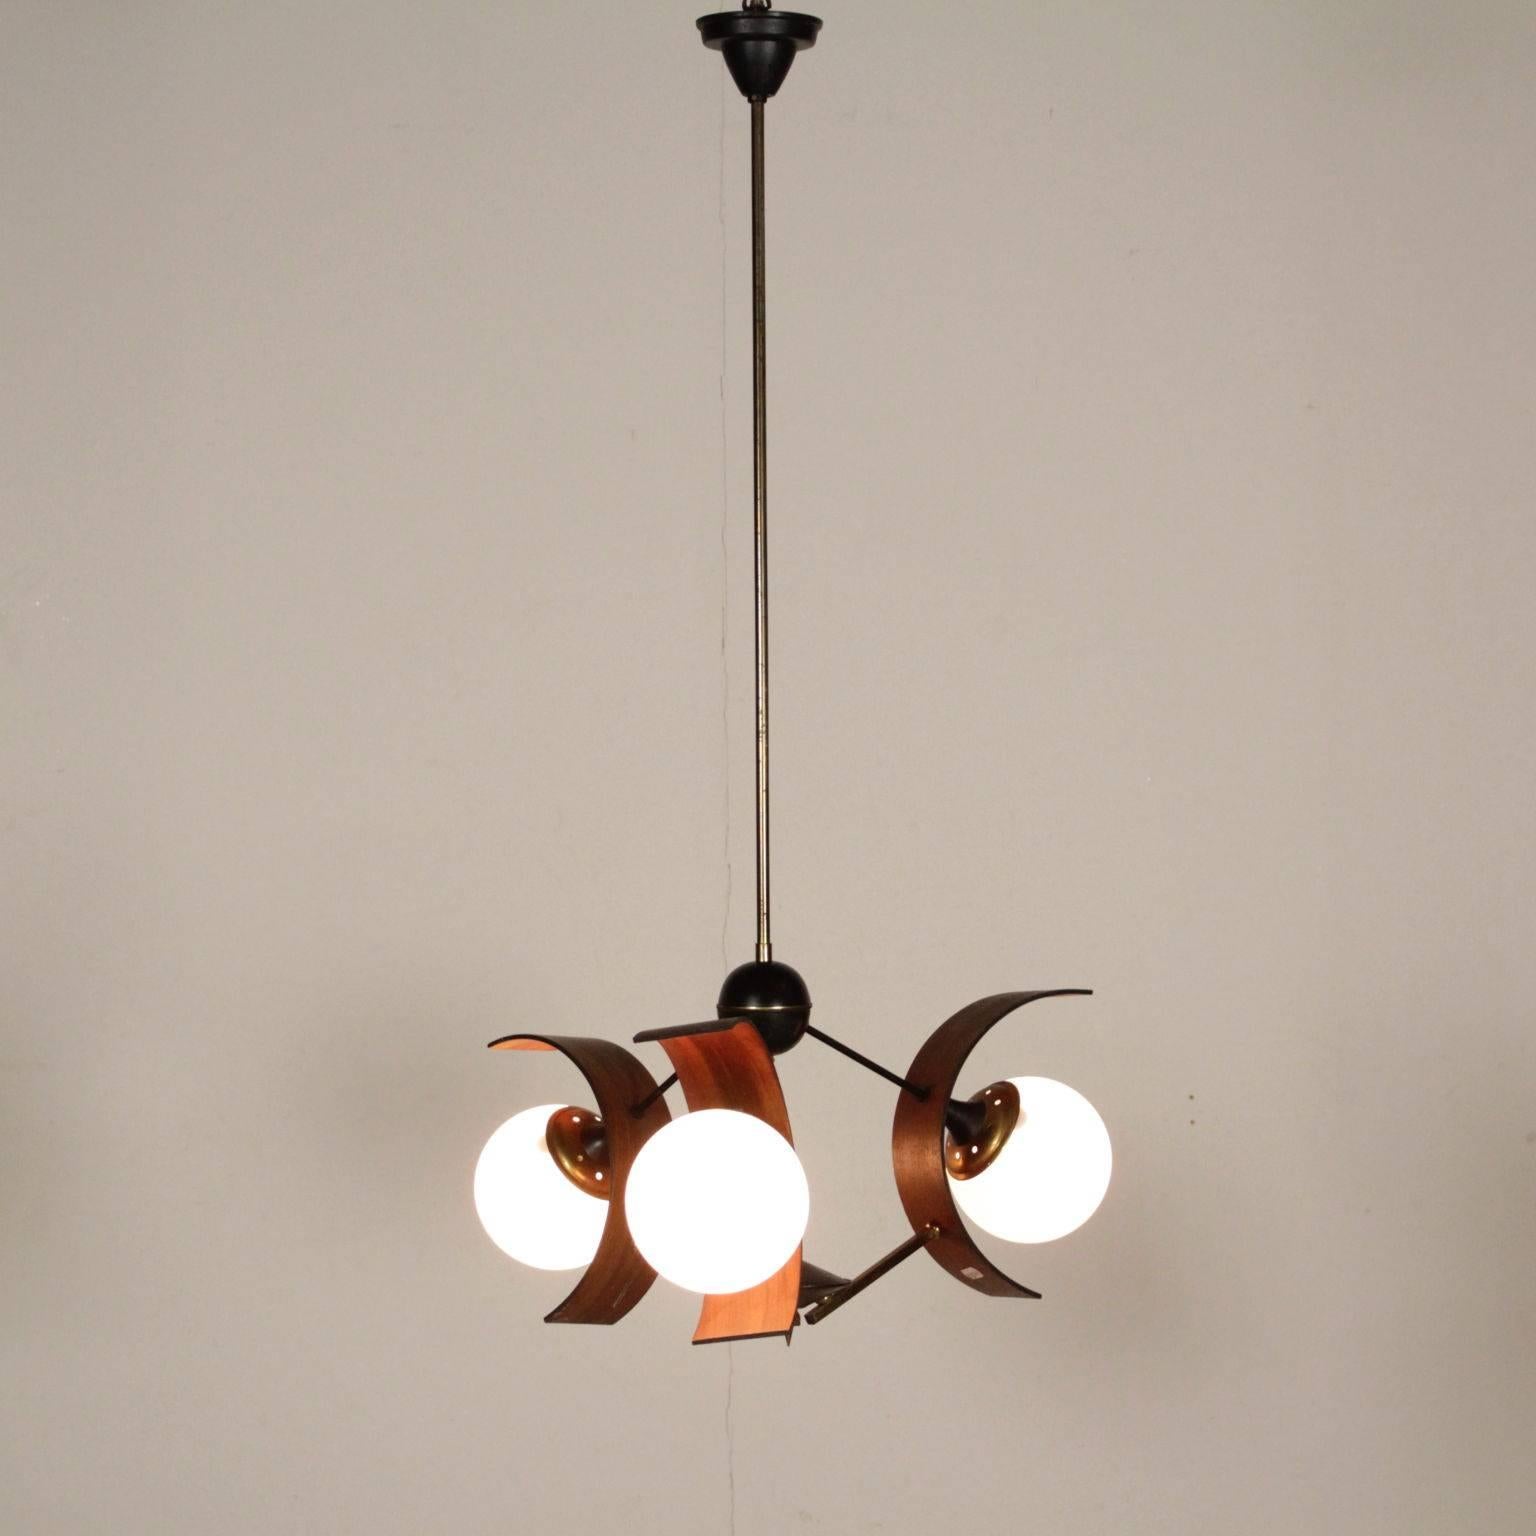 Ceiling lamp, brass, teak, opaline glass. Manufactured in Italy, 1960s.